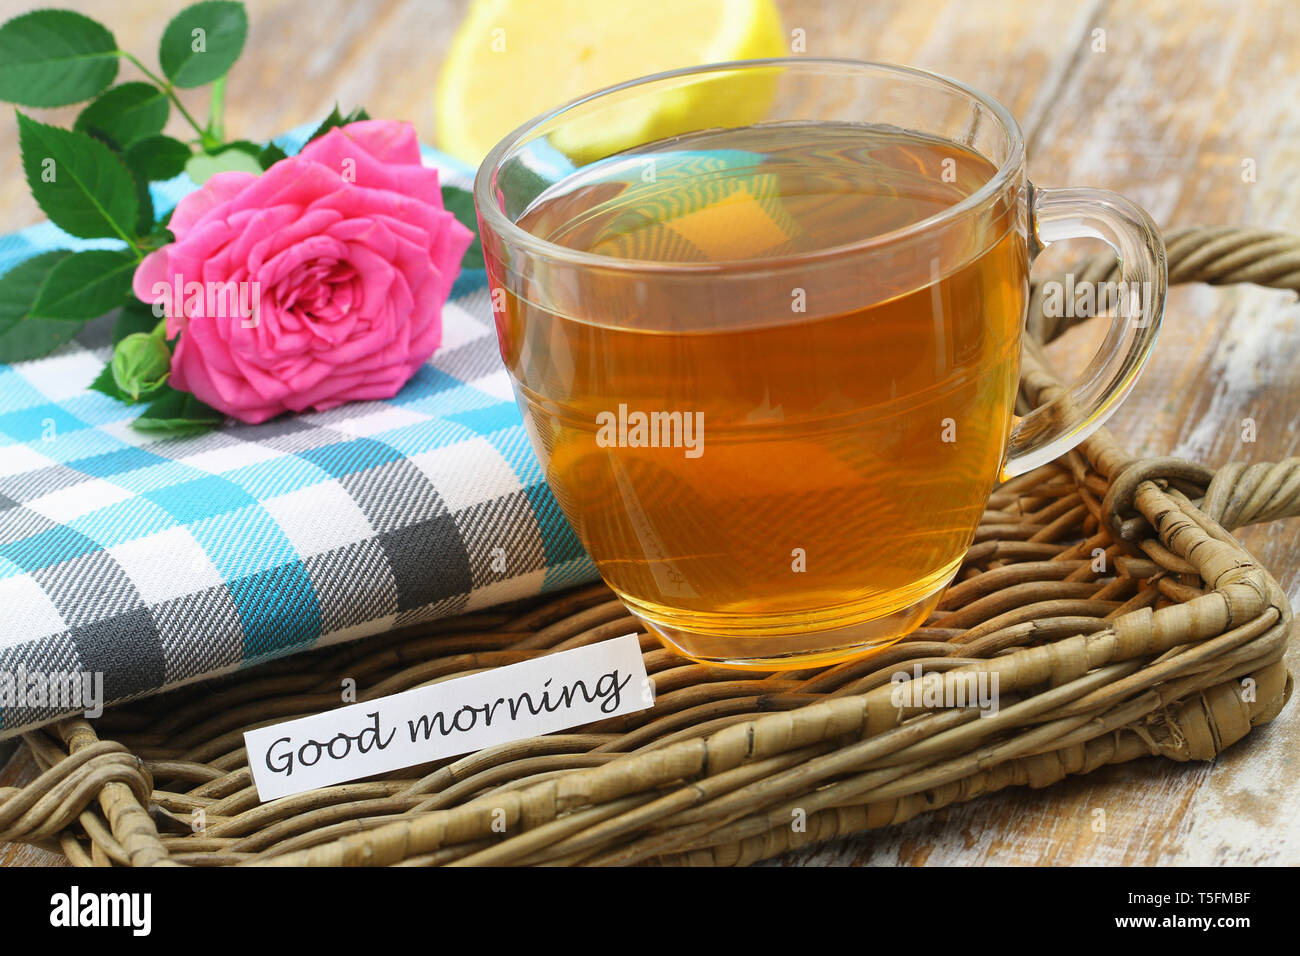 Good morning card with cup of tea and pink rose Stock Photo - Alamy